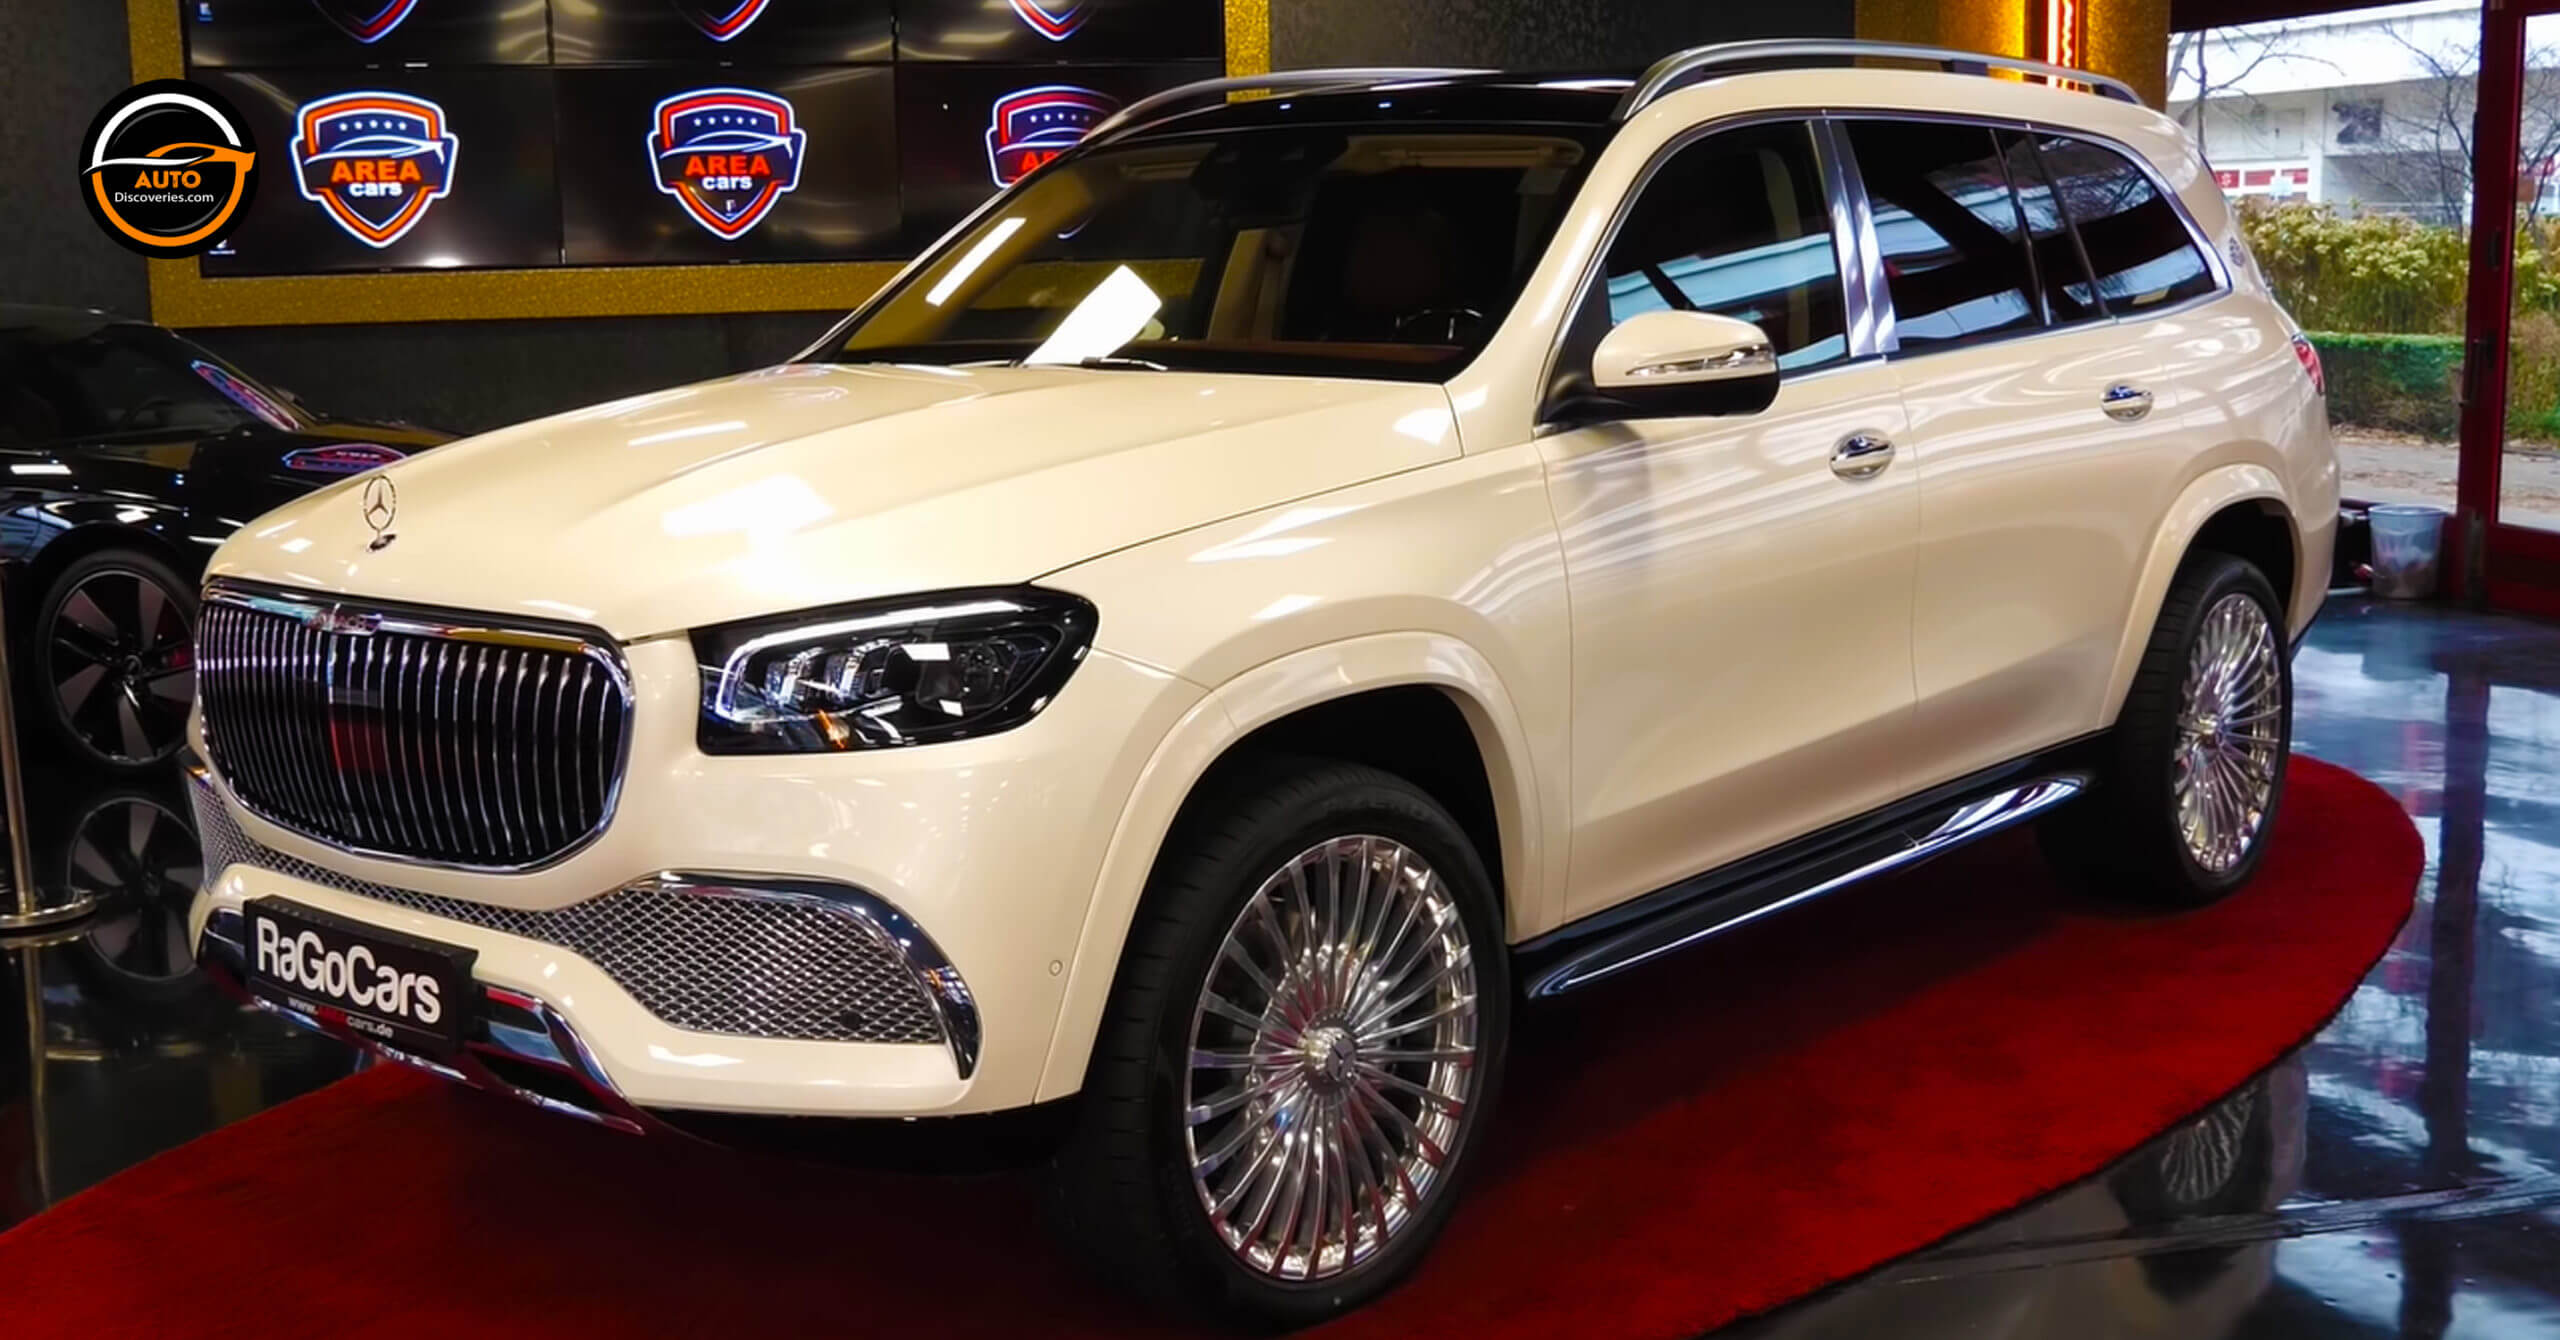 2022 Mercedes-Maybach GLS 600 4MATIC | Super Mega Luxury Flagship SUV -  Auto Discoveries